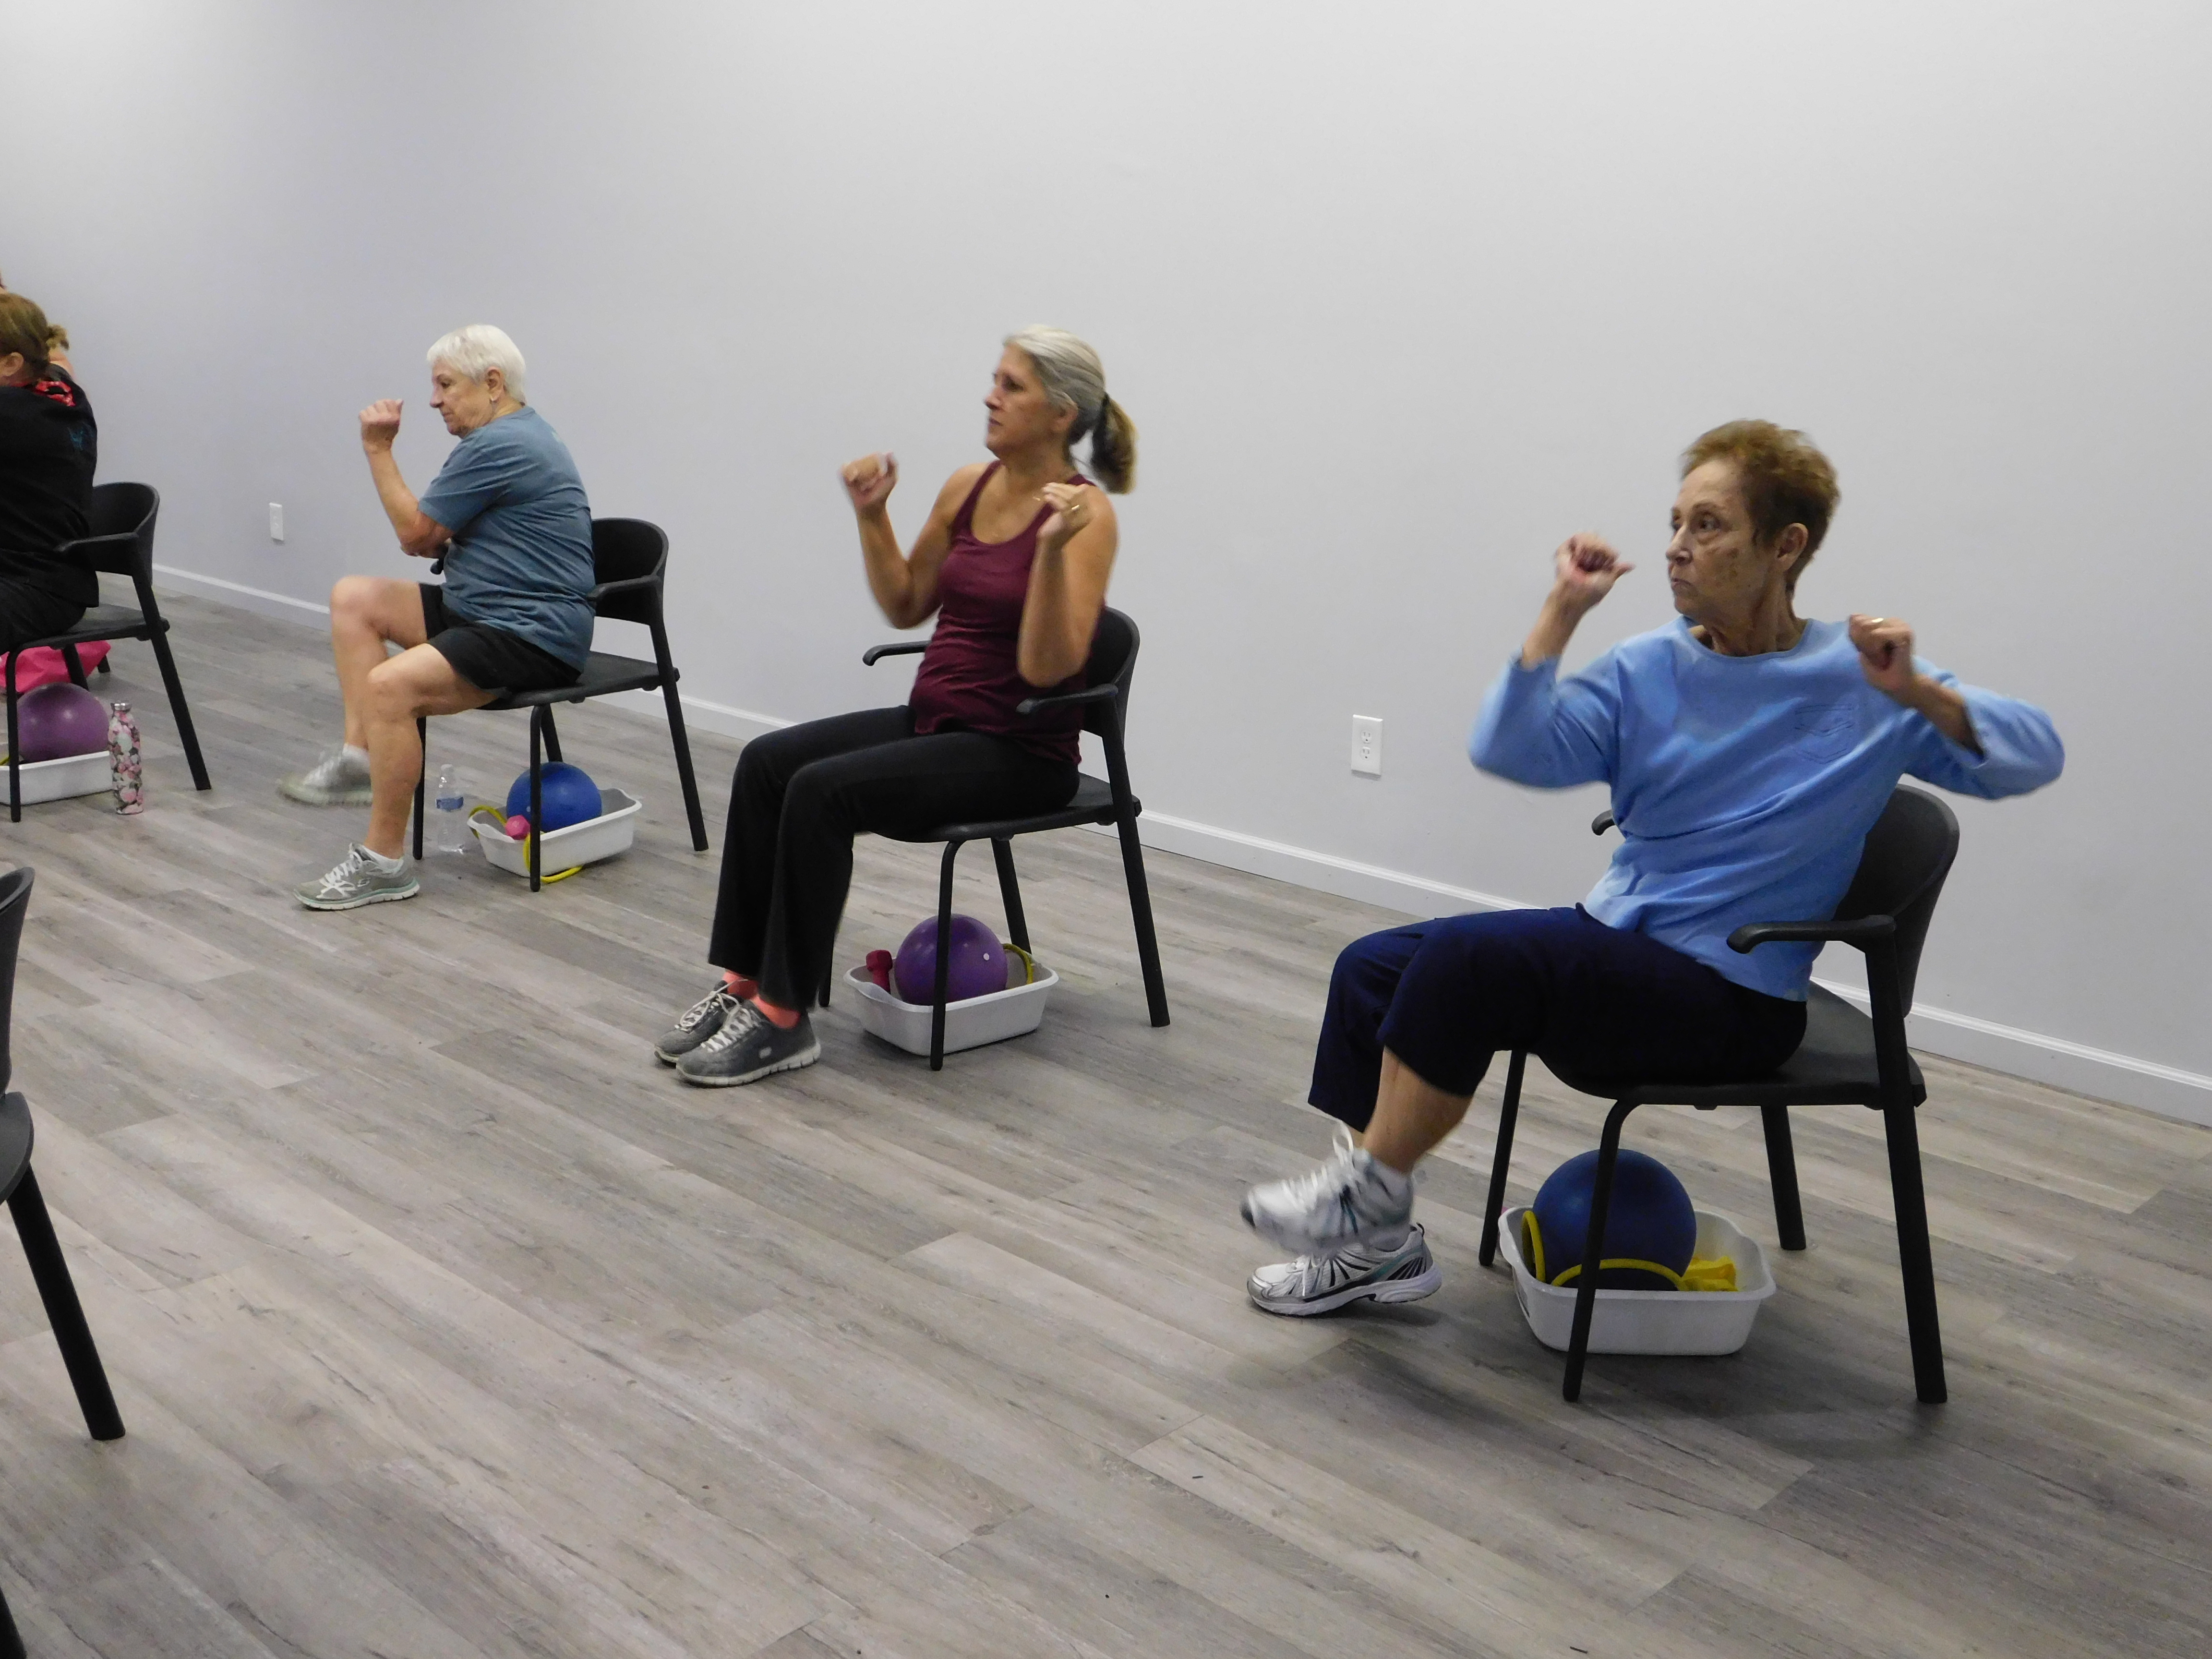 Women Doing Exercises in Chairs